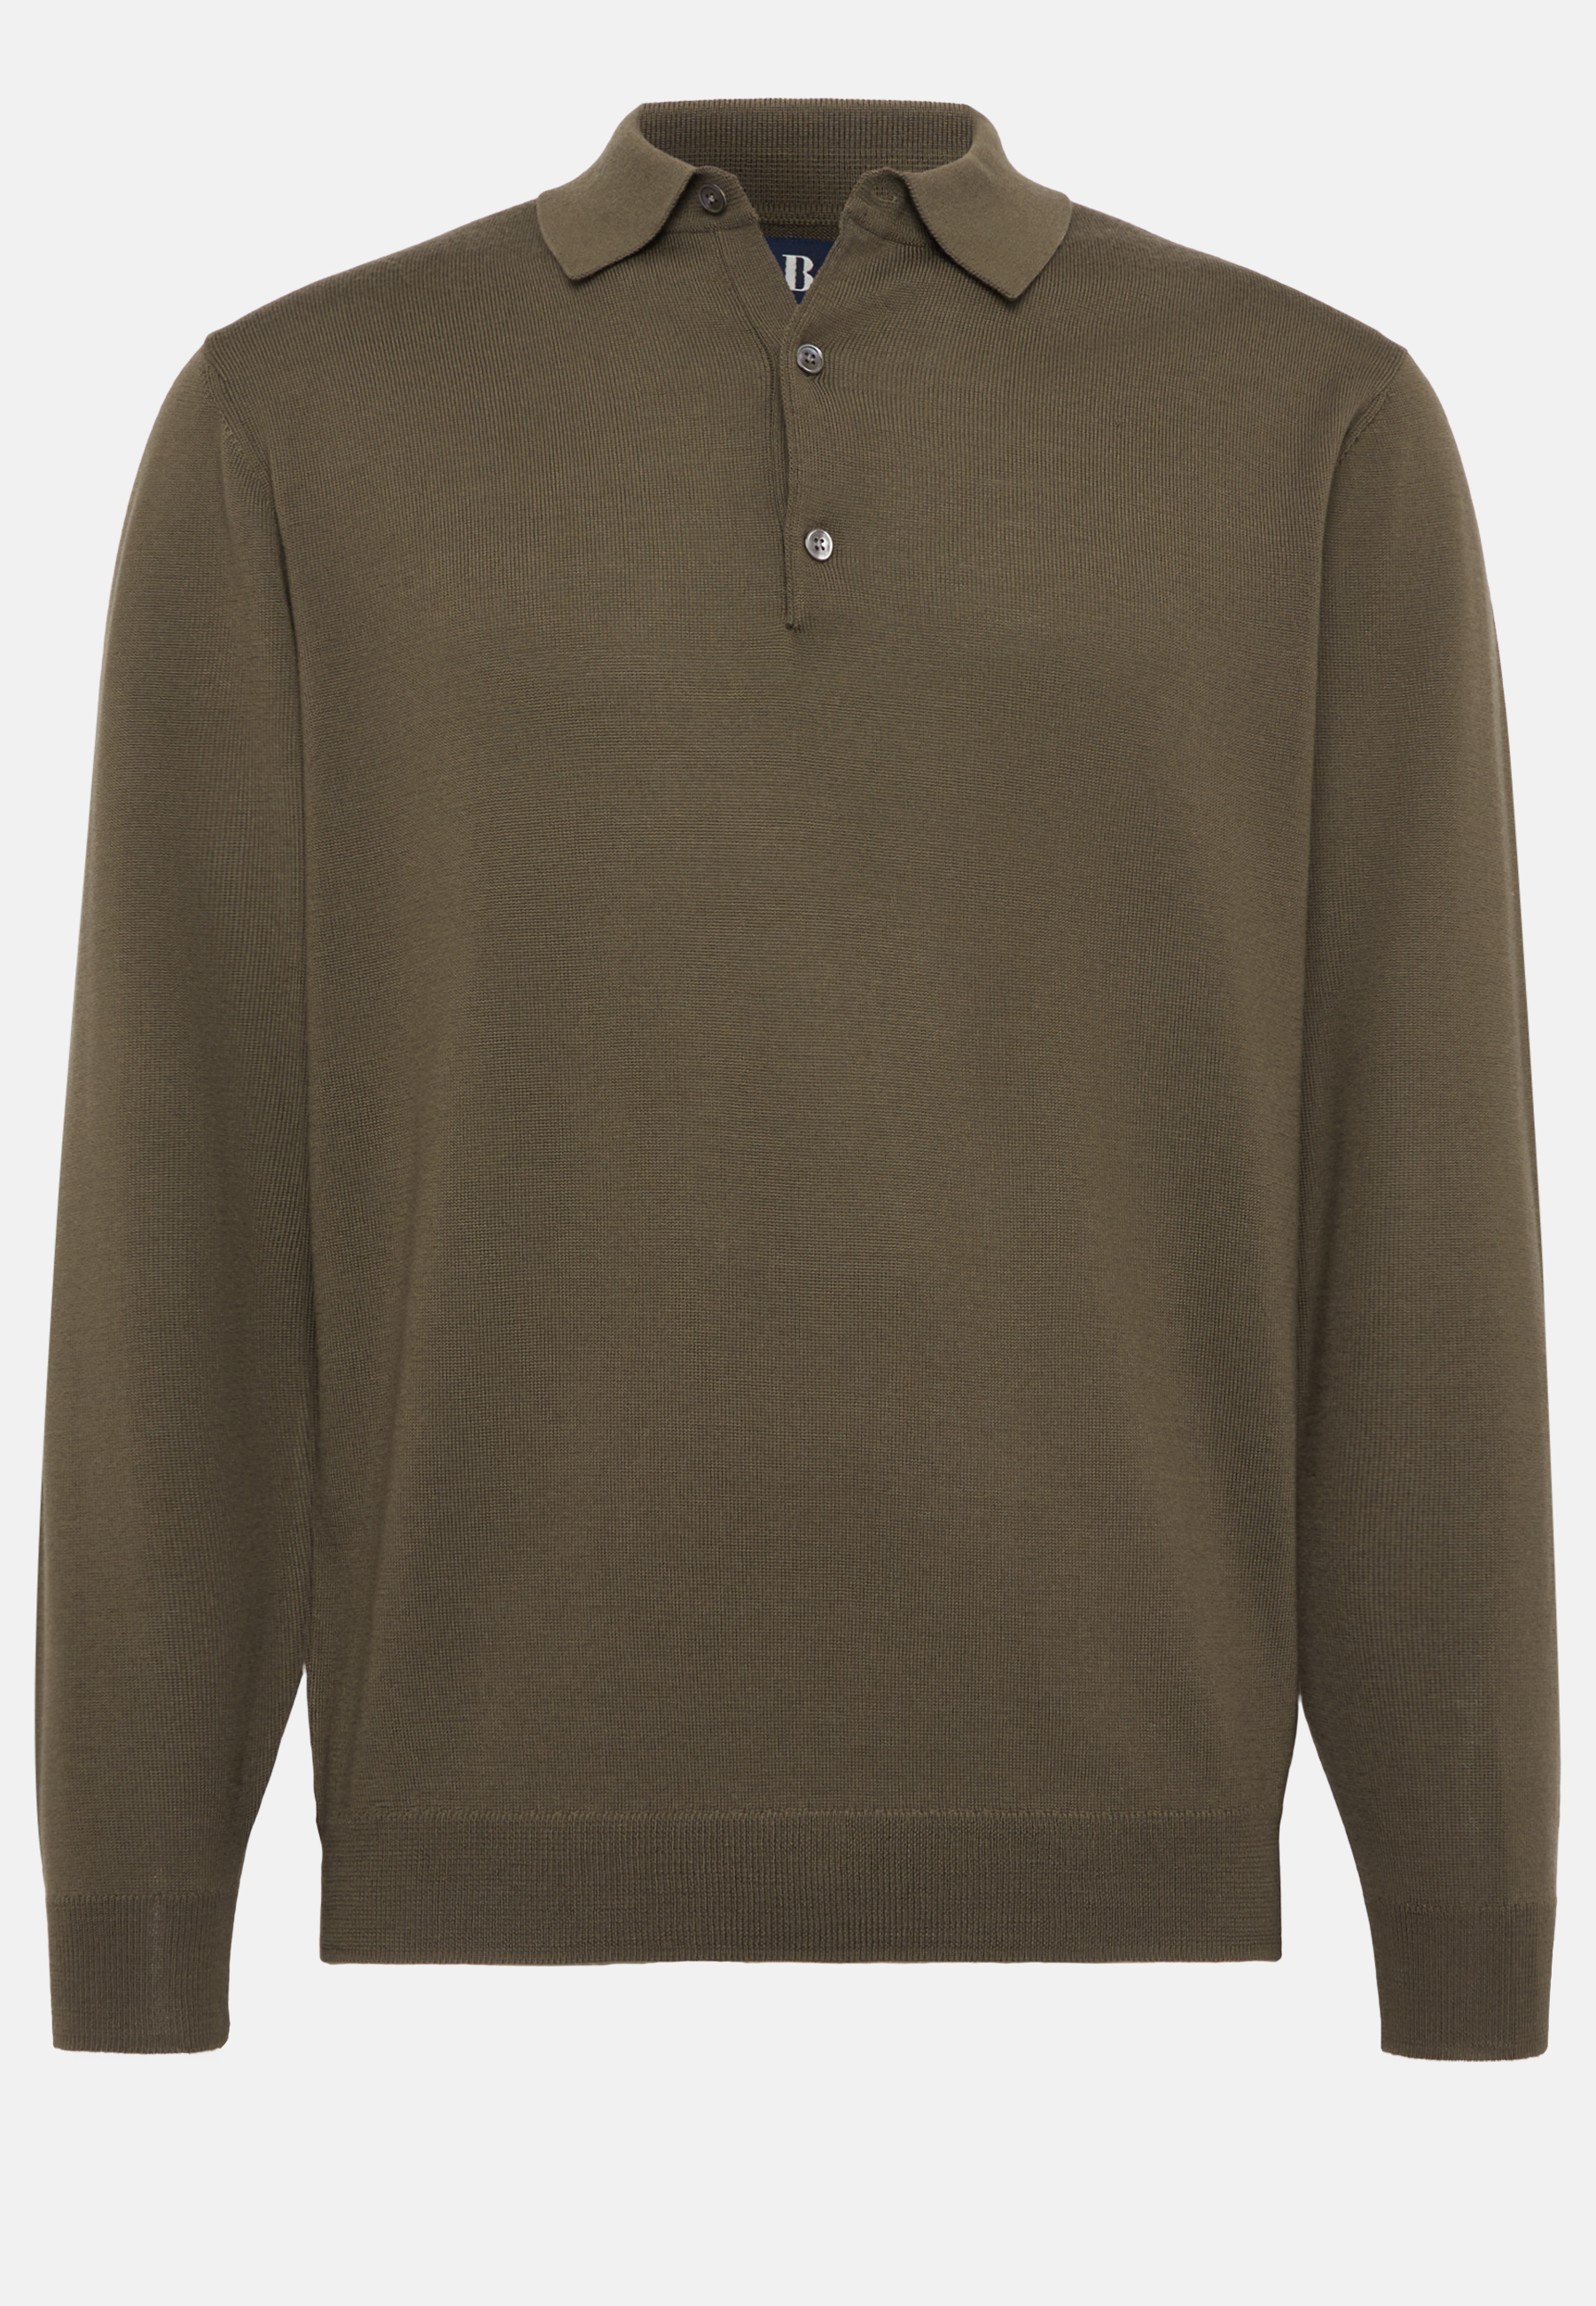 Buy Olive Green Regular Knitted Long Sleeve Polo Shirt from Next